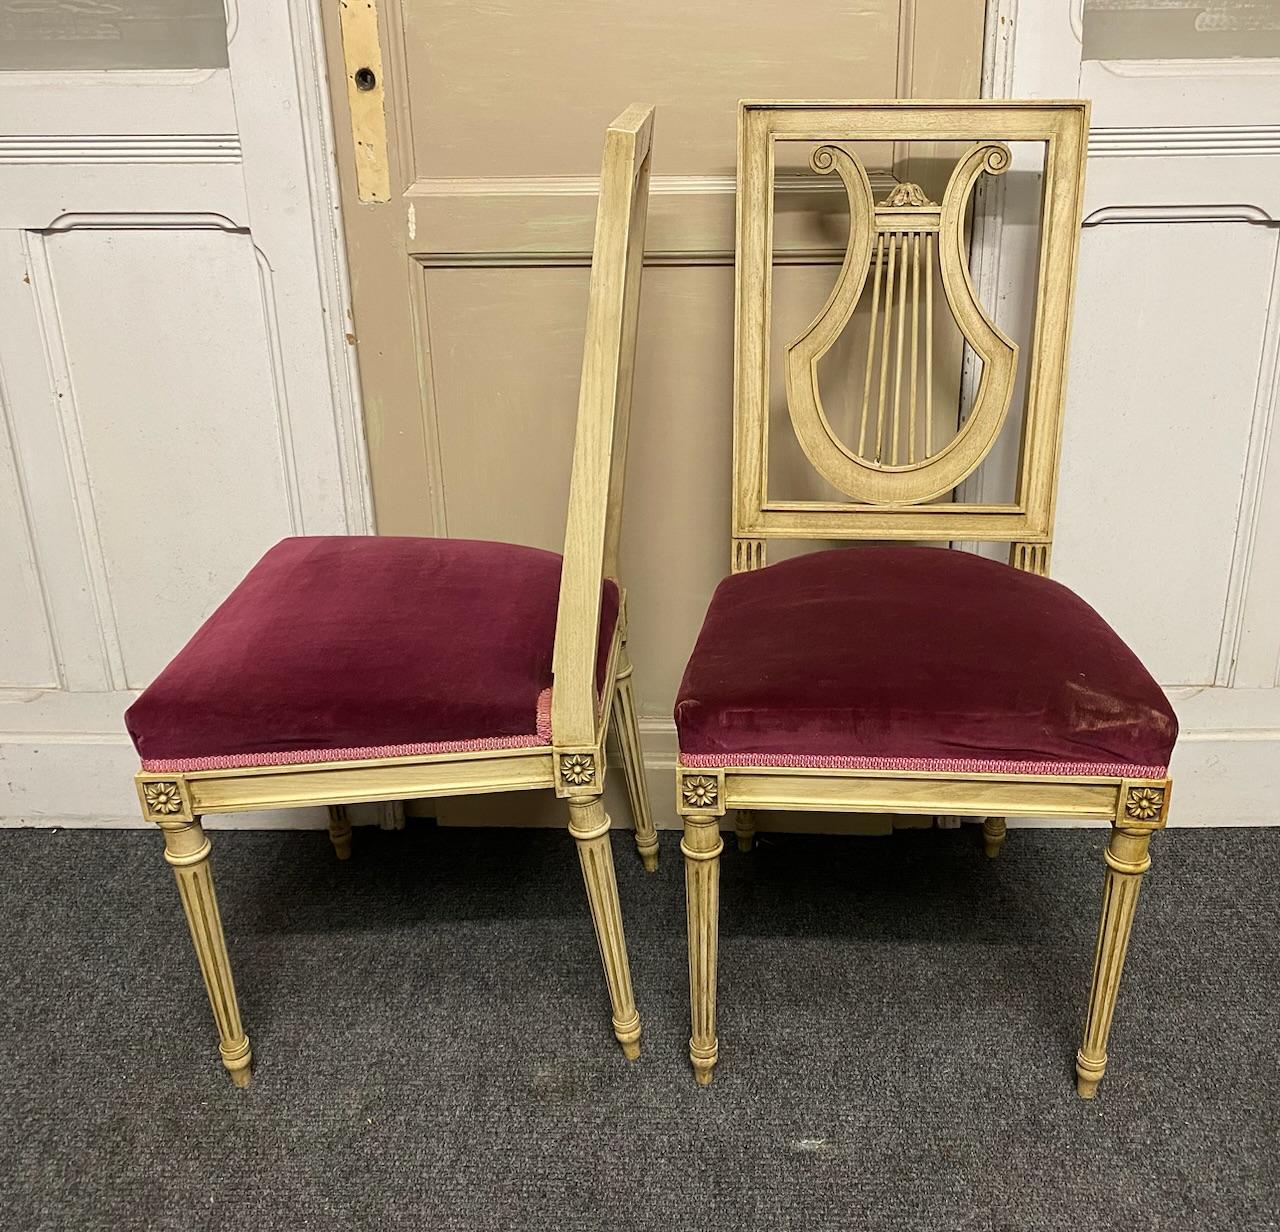 A nice set of painted French dining chairs with red velvet sprung seats. Nice harp back design. Chairs are strong and sturdy and in excellent original condition for the home.